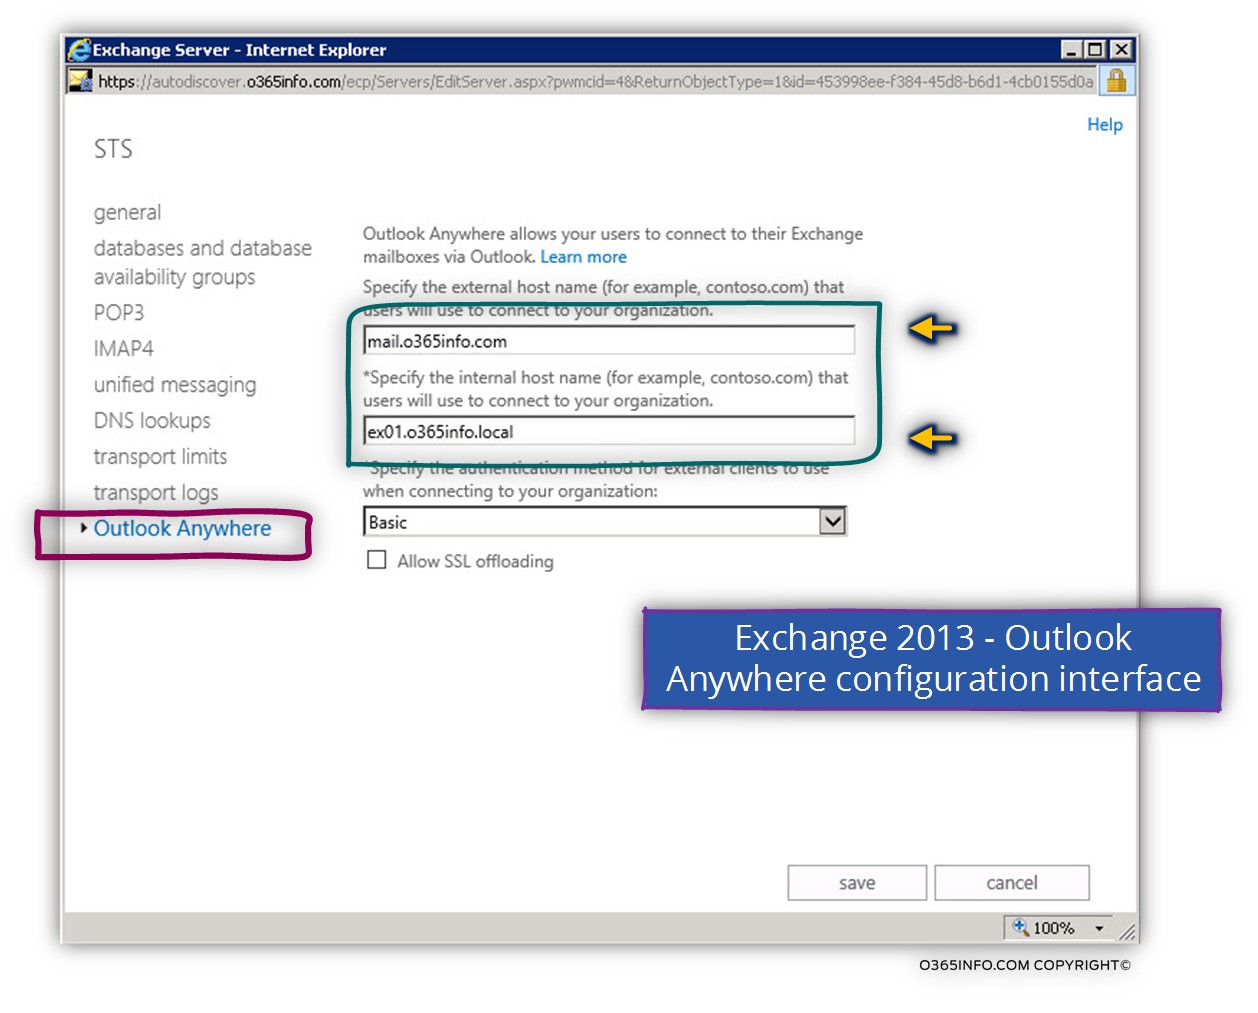 Exchange 2013 WEB interface for managing Outlook Anywhere RPC over HTTPS services-04